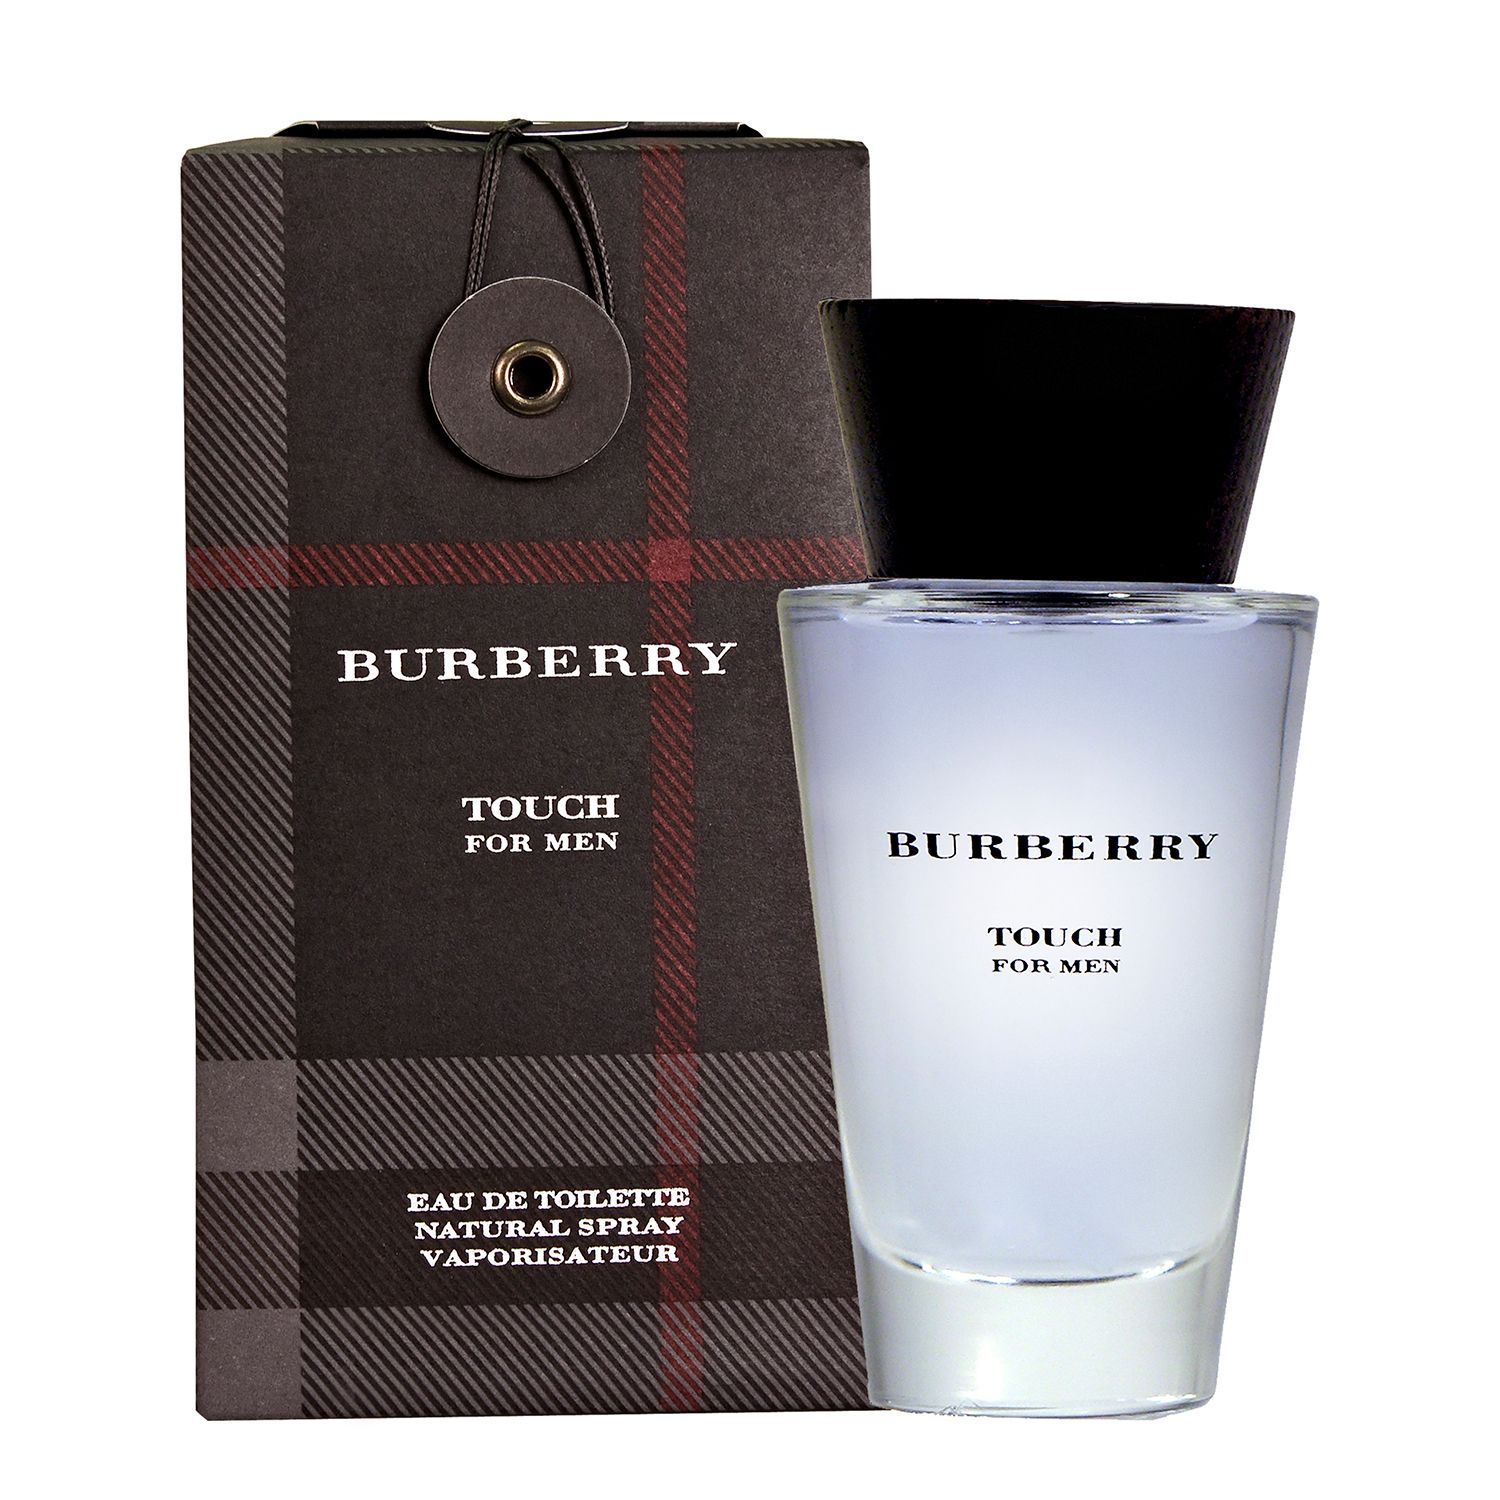 touch cologne by burberry